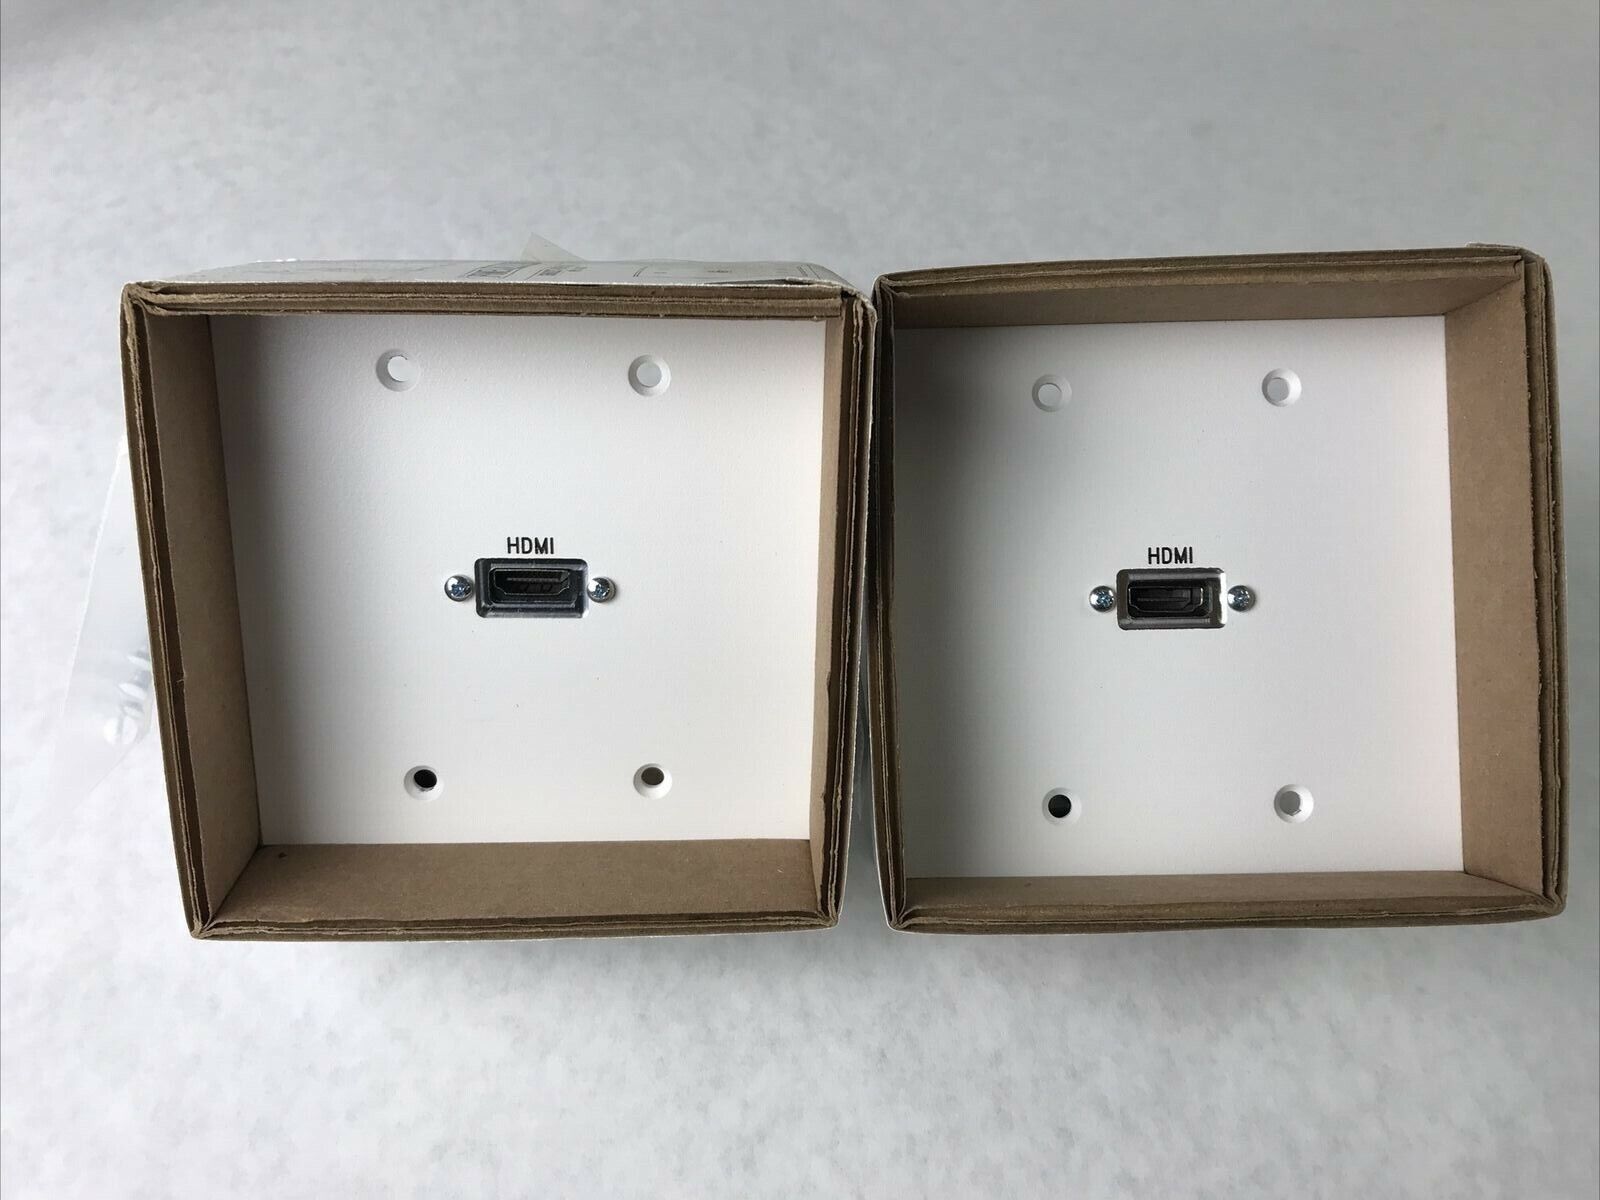 Panel Crafters 1-Gang HDMI Wall Plate S66227-WQ555720 Lot of (2)